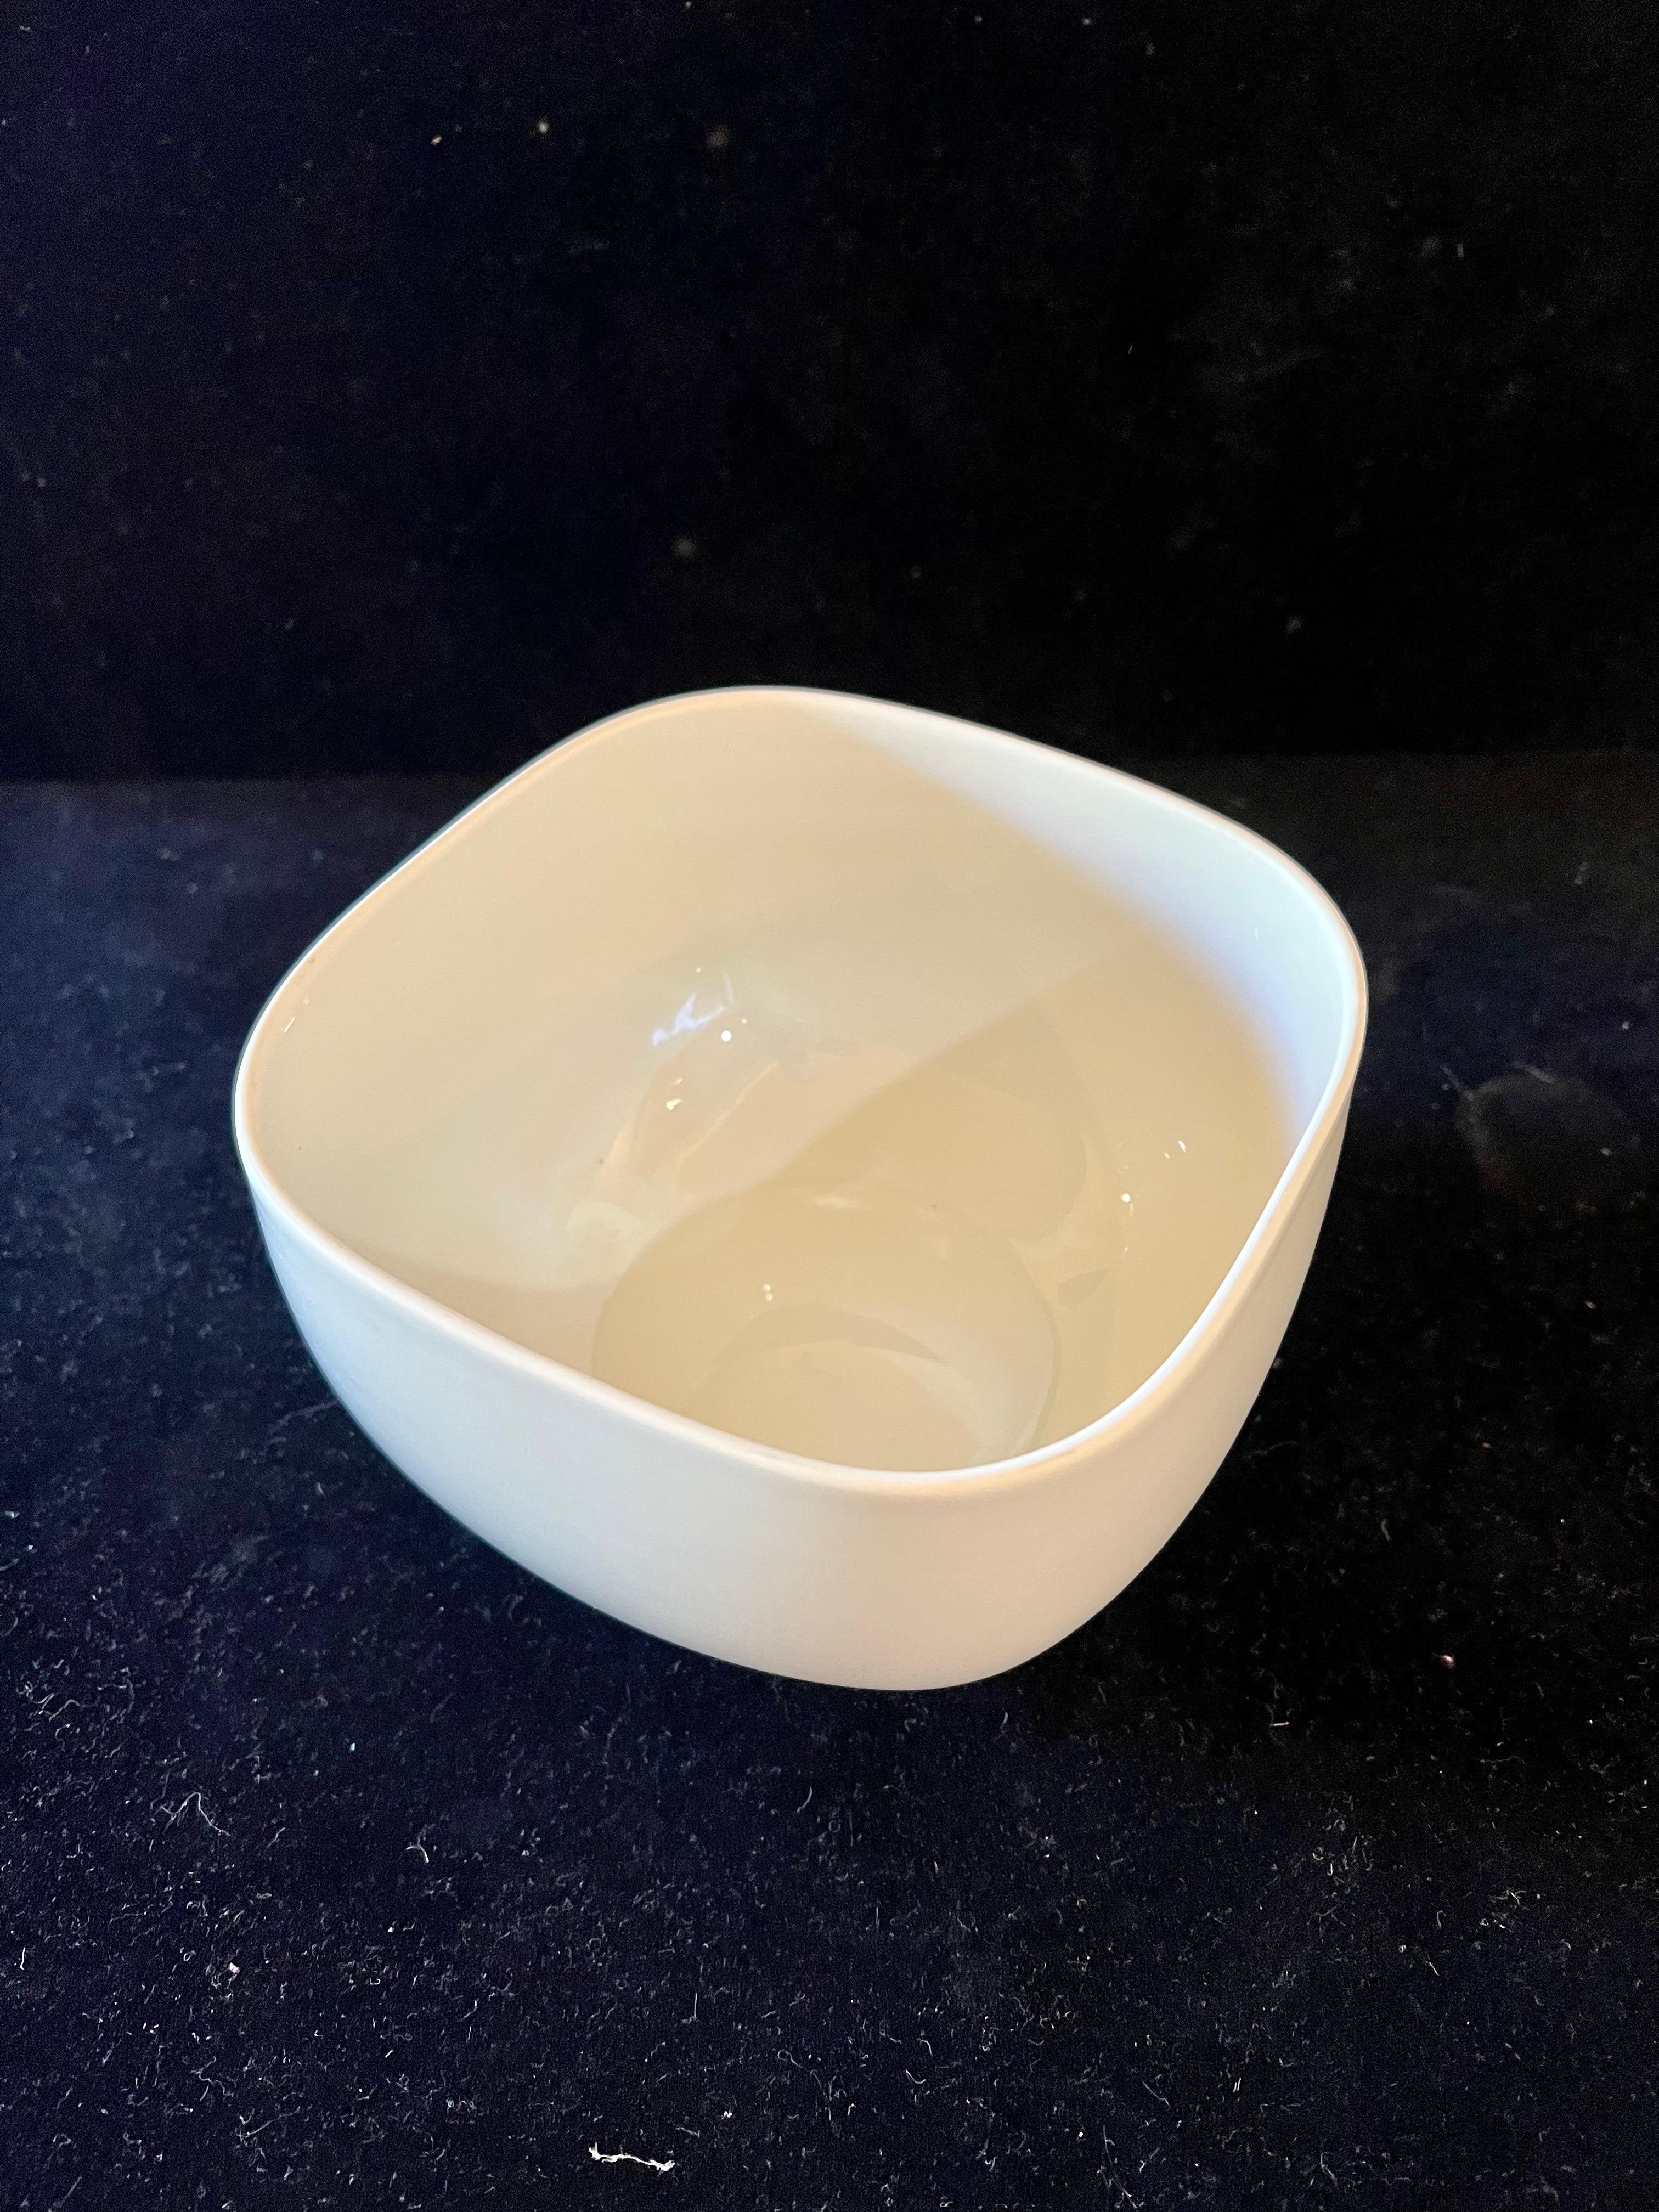 Nice design simple elegant porcelain bowl designed by Timo Sarpaneva for Rosenthal studio, circa 1970's excellent condition no chips or cracks Buyer has the option to buy 1 or 2.